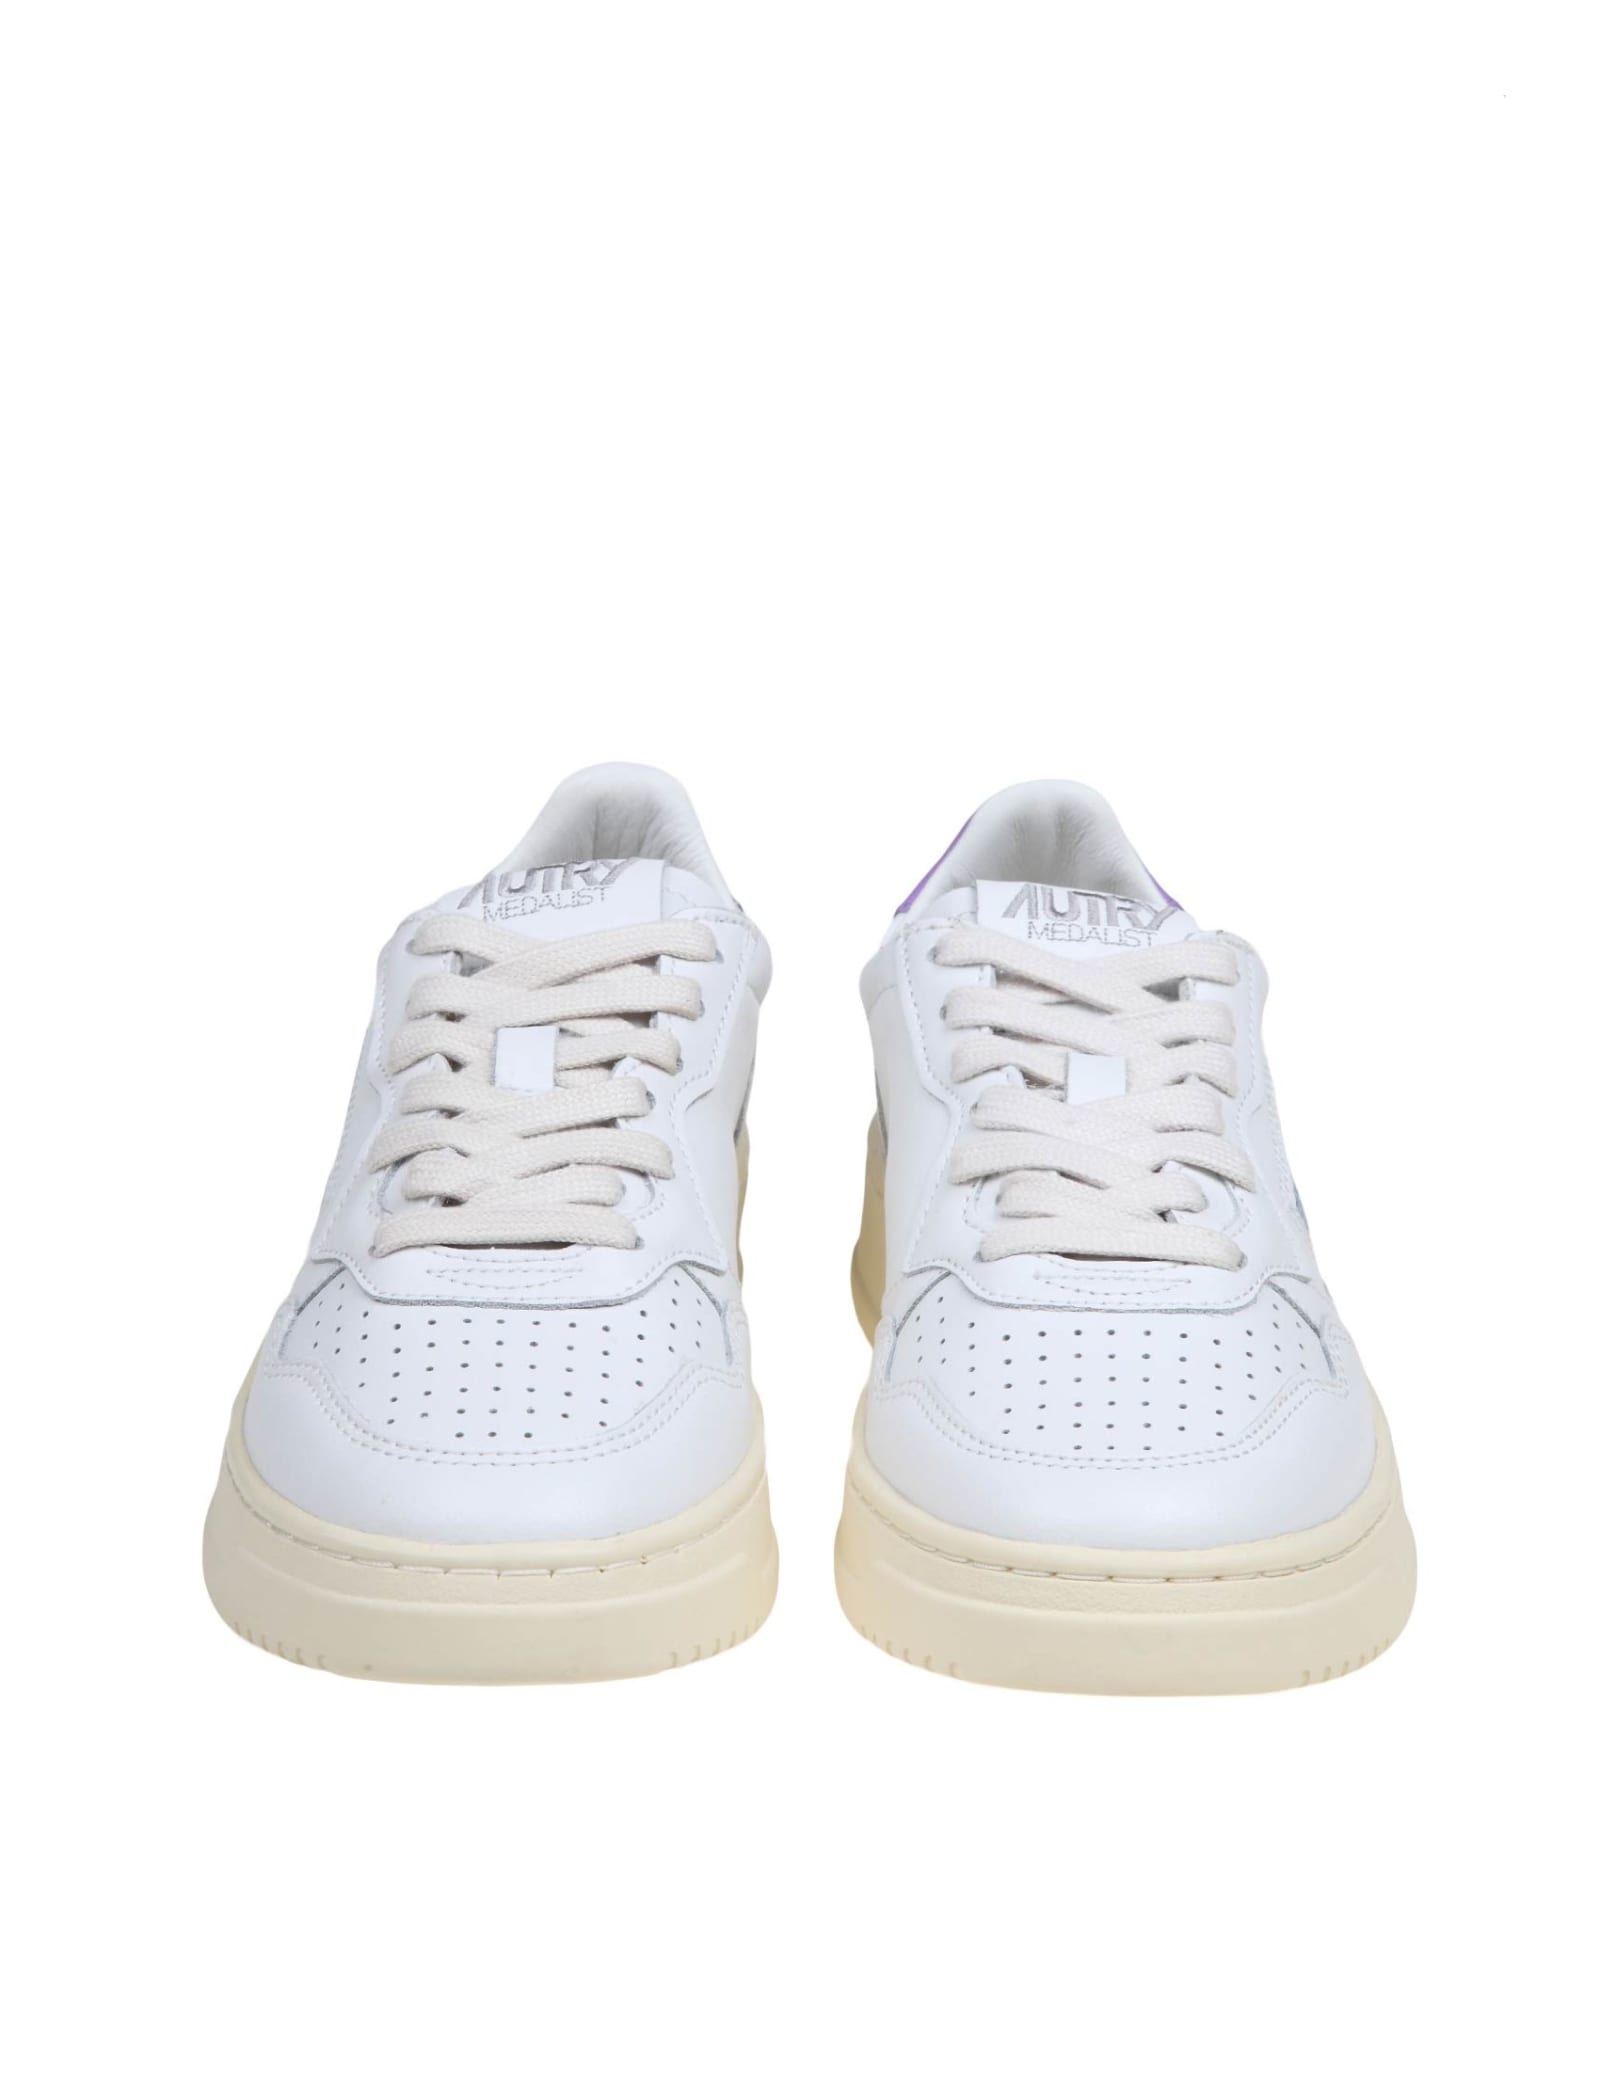 Shop Autry White And Lavender Leather Sneakers In White/lavender